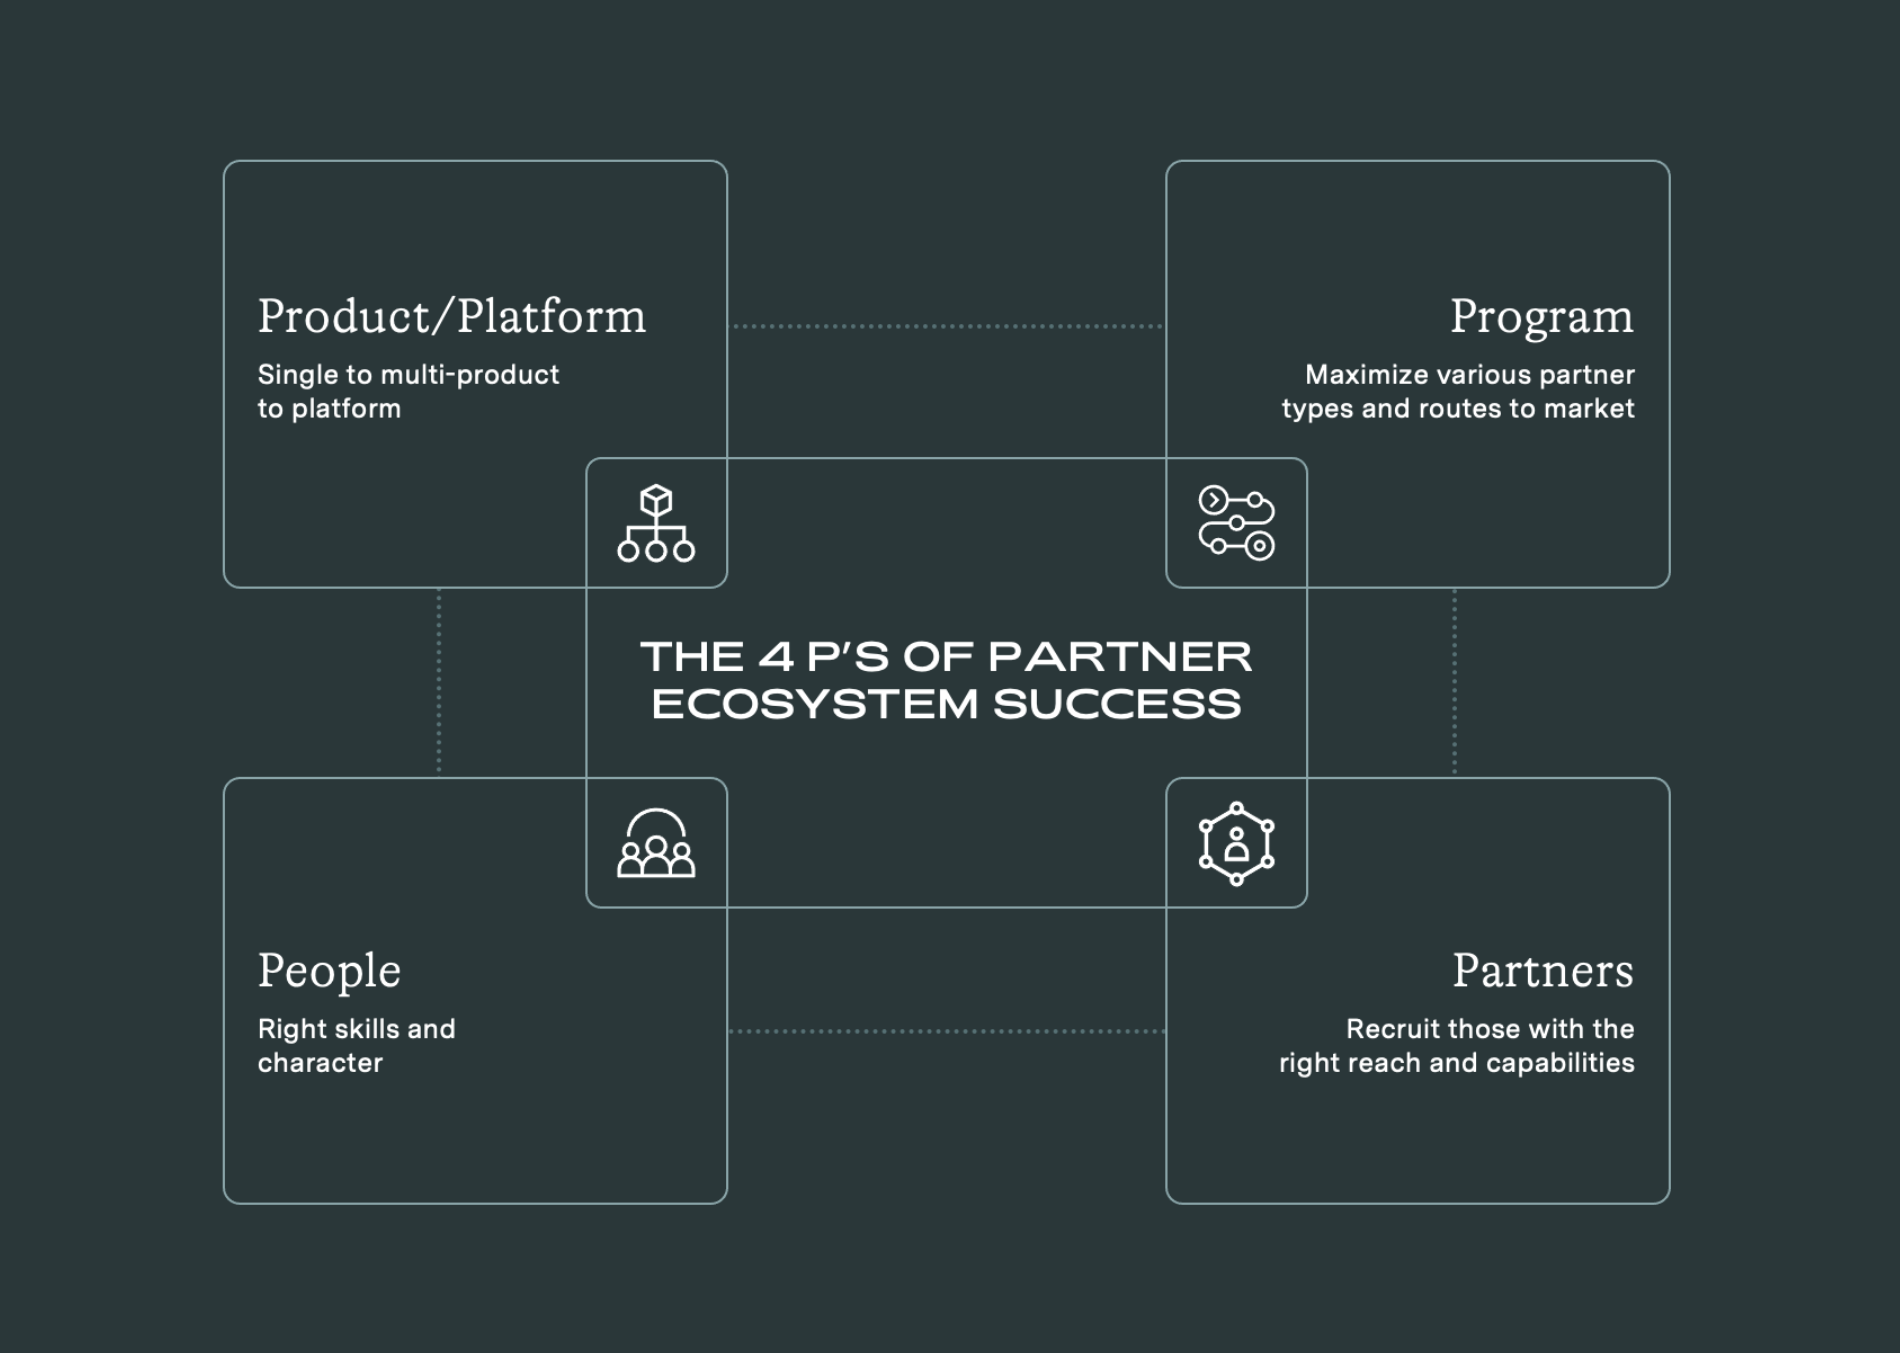 Introducing A Guide to Building an Effective Partner Strategy Framework